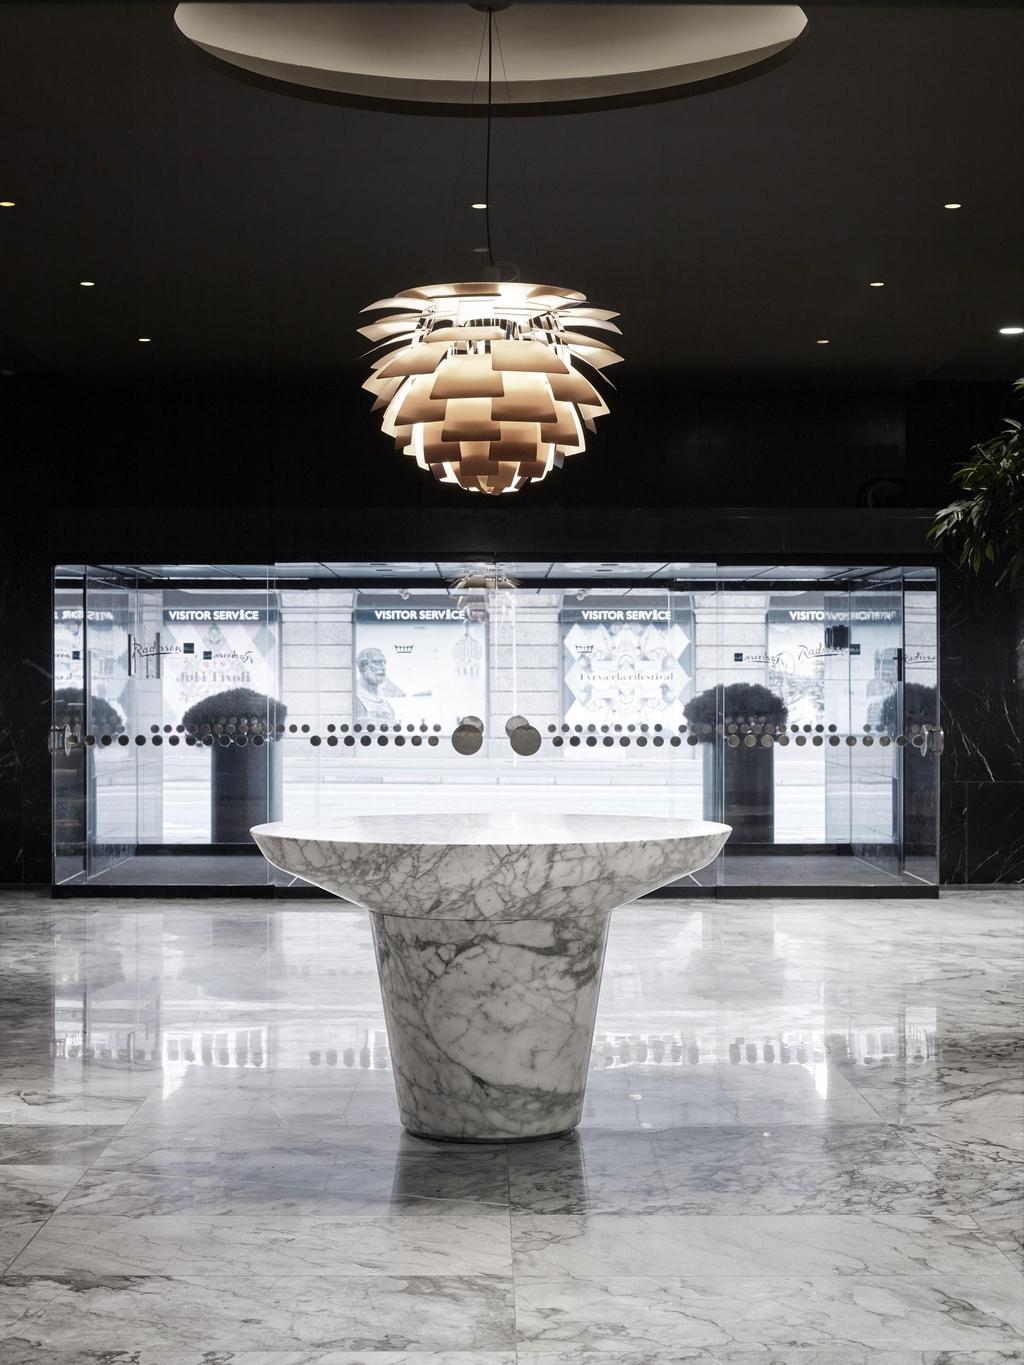 Concept When the hotel opened it heralded a new era of modern hospitality brought to life through design from the architecture to the furnishing to the lighting right down the details of the cutlery